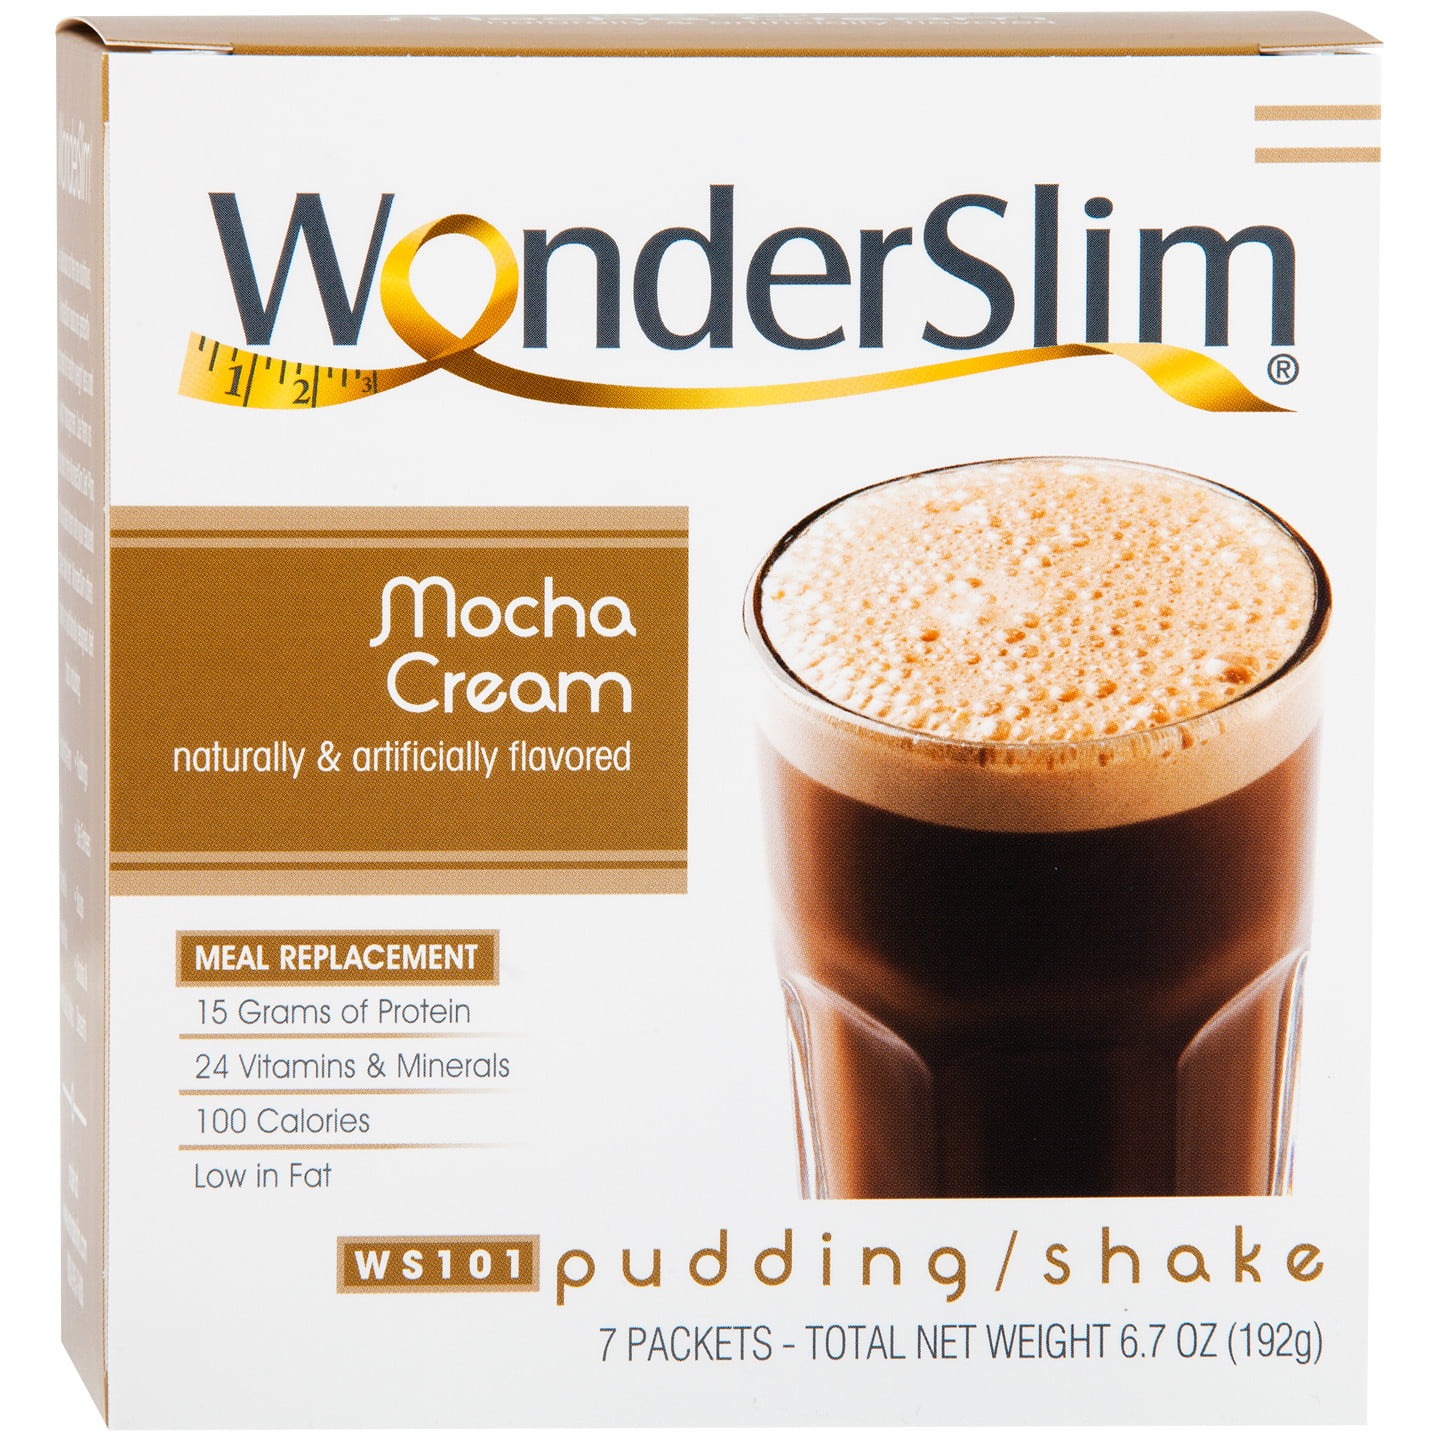 WonderSlim High Protein Meal Replacement Weight Loss Shake/LowCarb